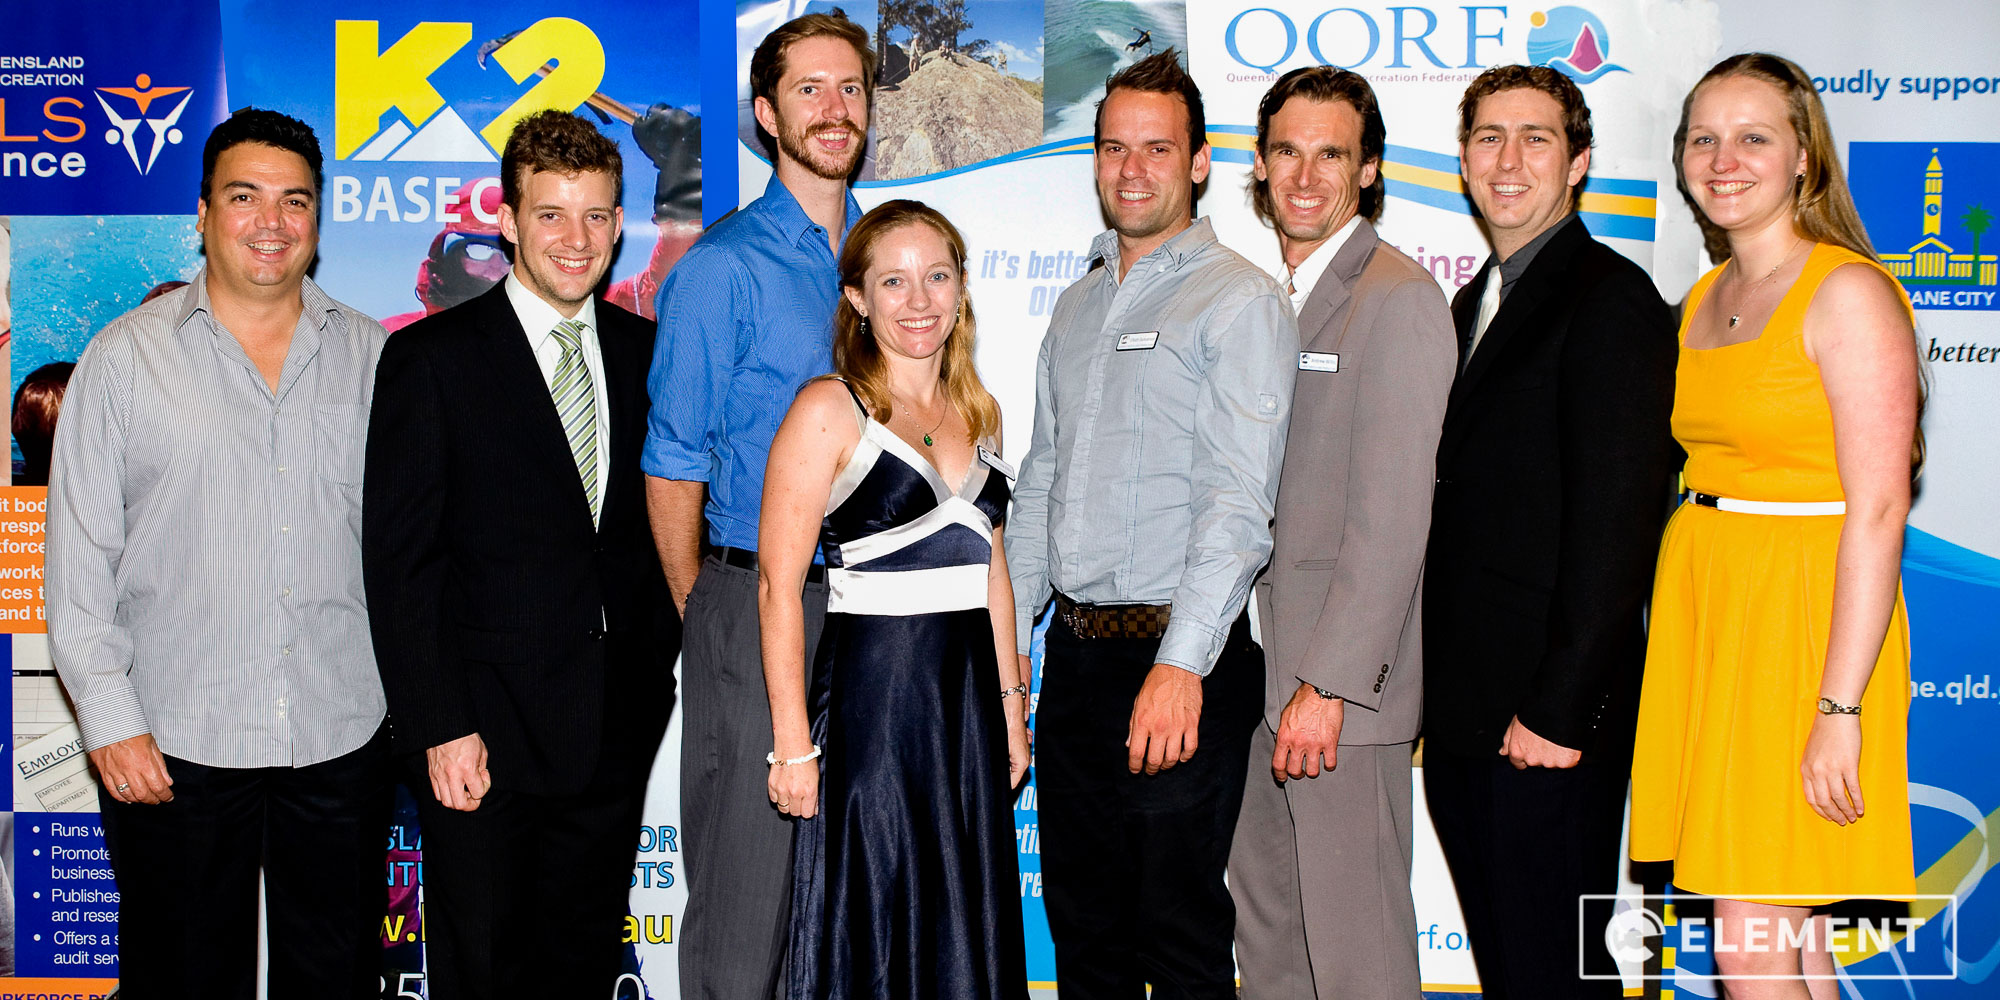 The Element team at QORF Awards evening